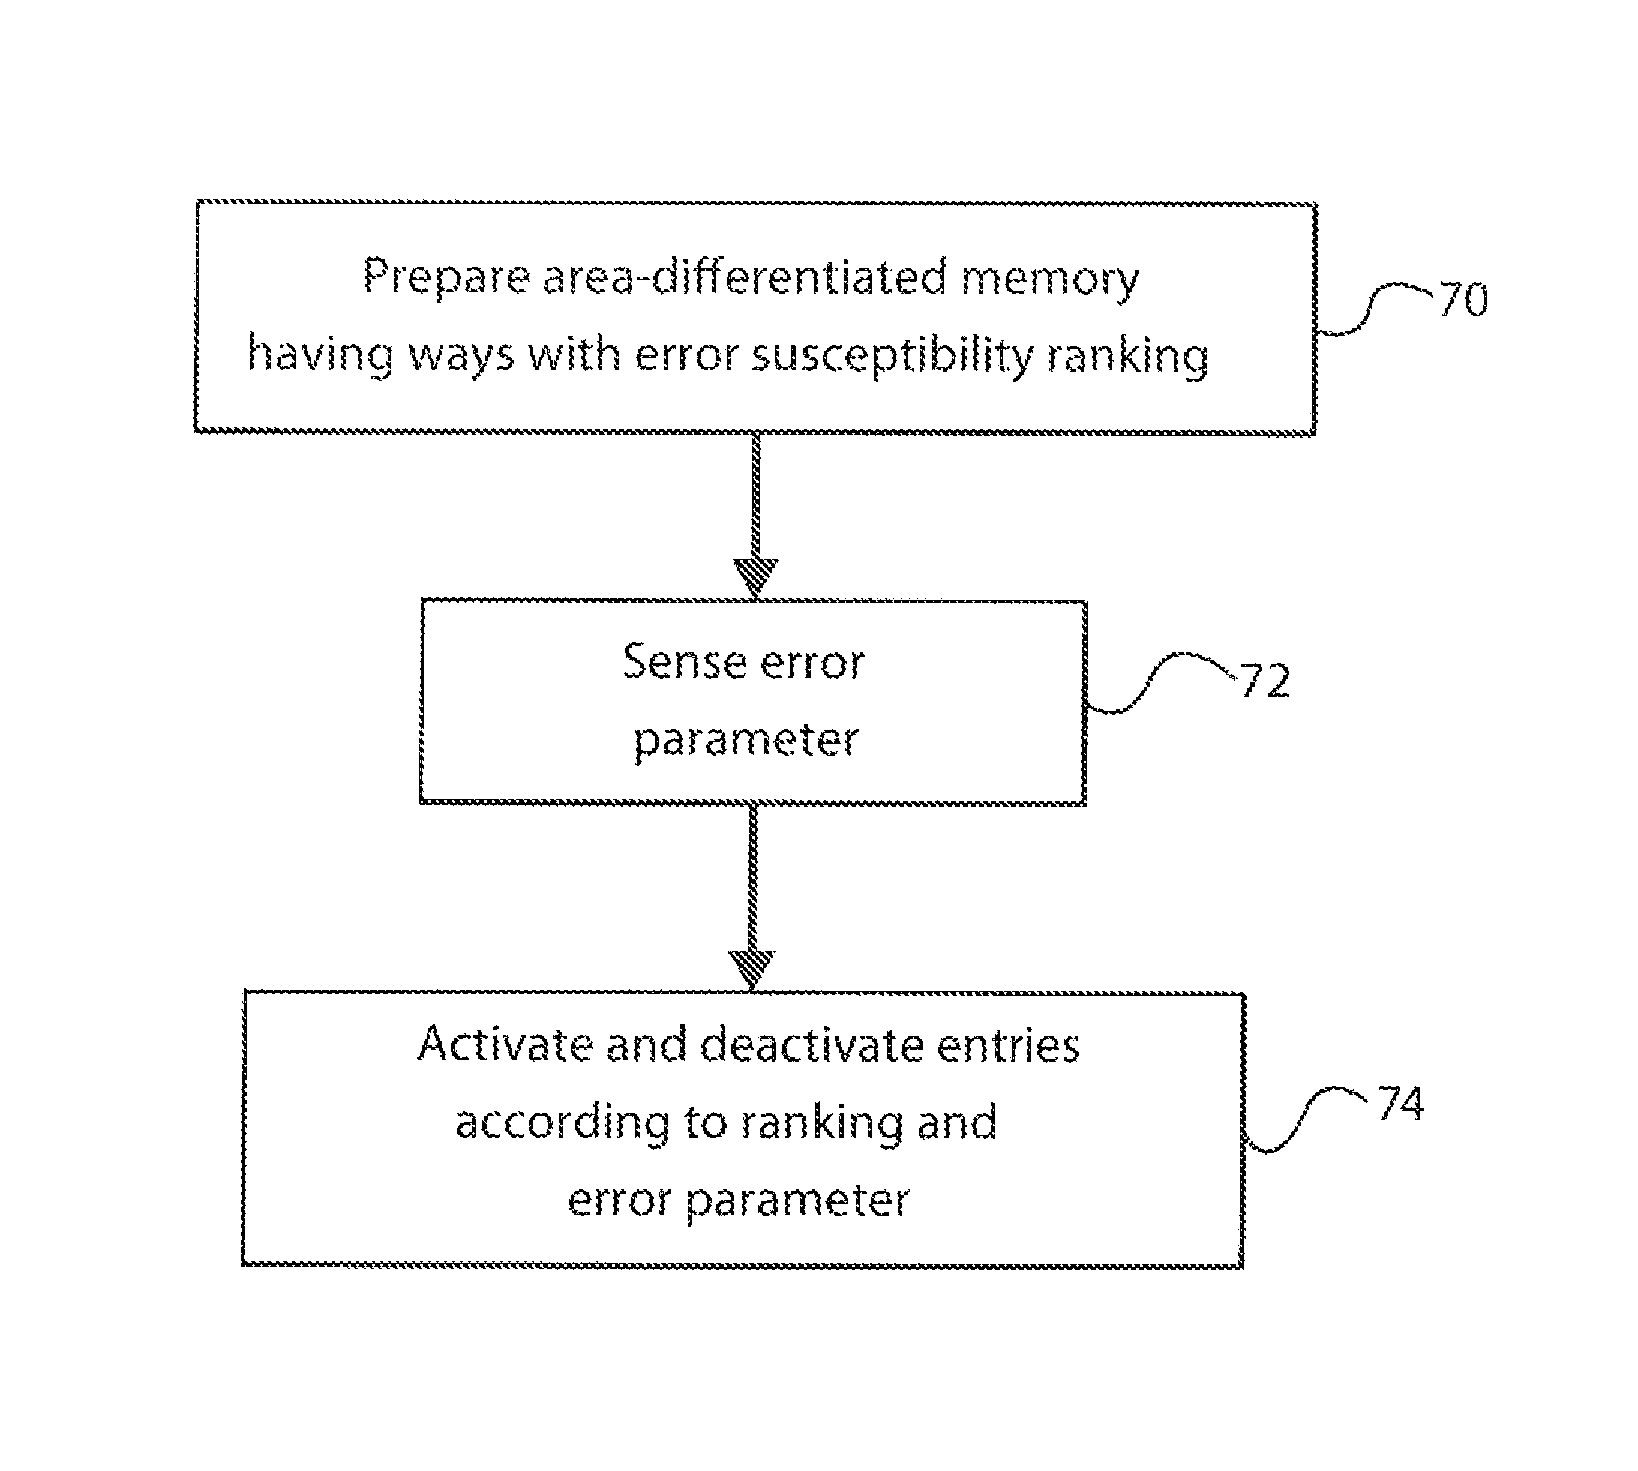 Dynamic error handling for on-chip memory structures